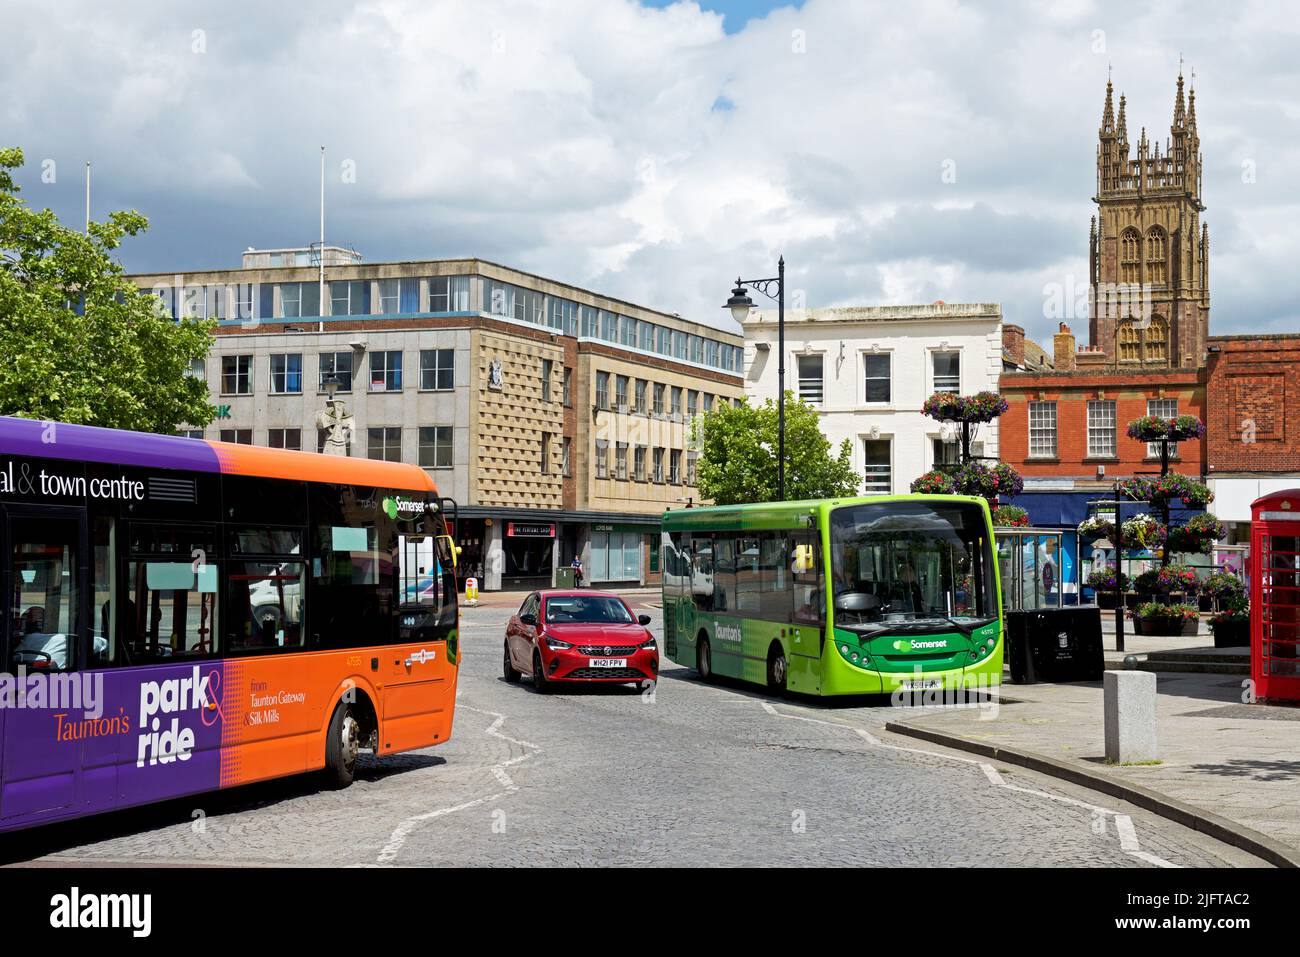 Buses in the town centre, Taunton, Somerset, England UK Stock Photo